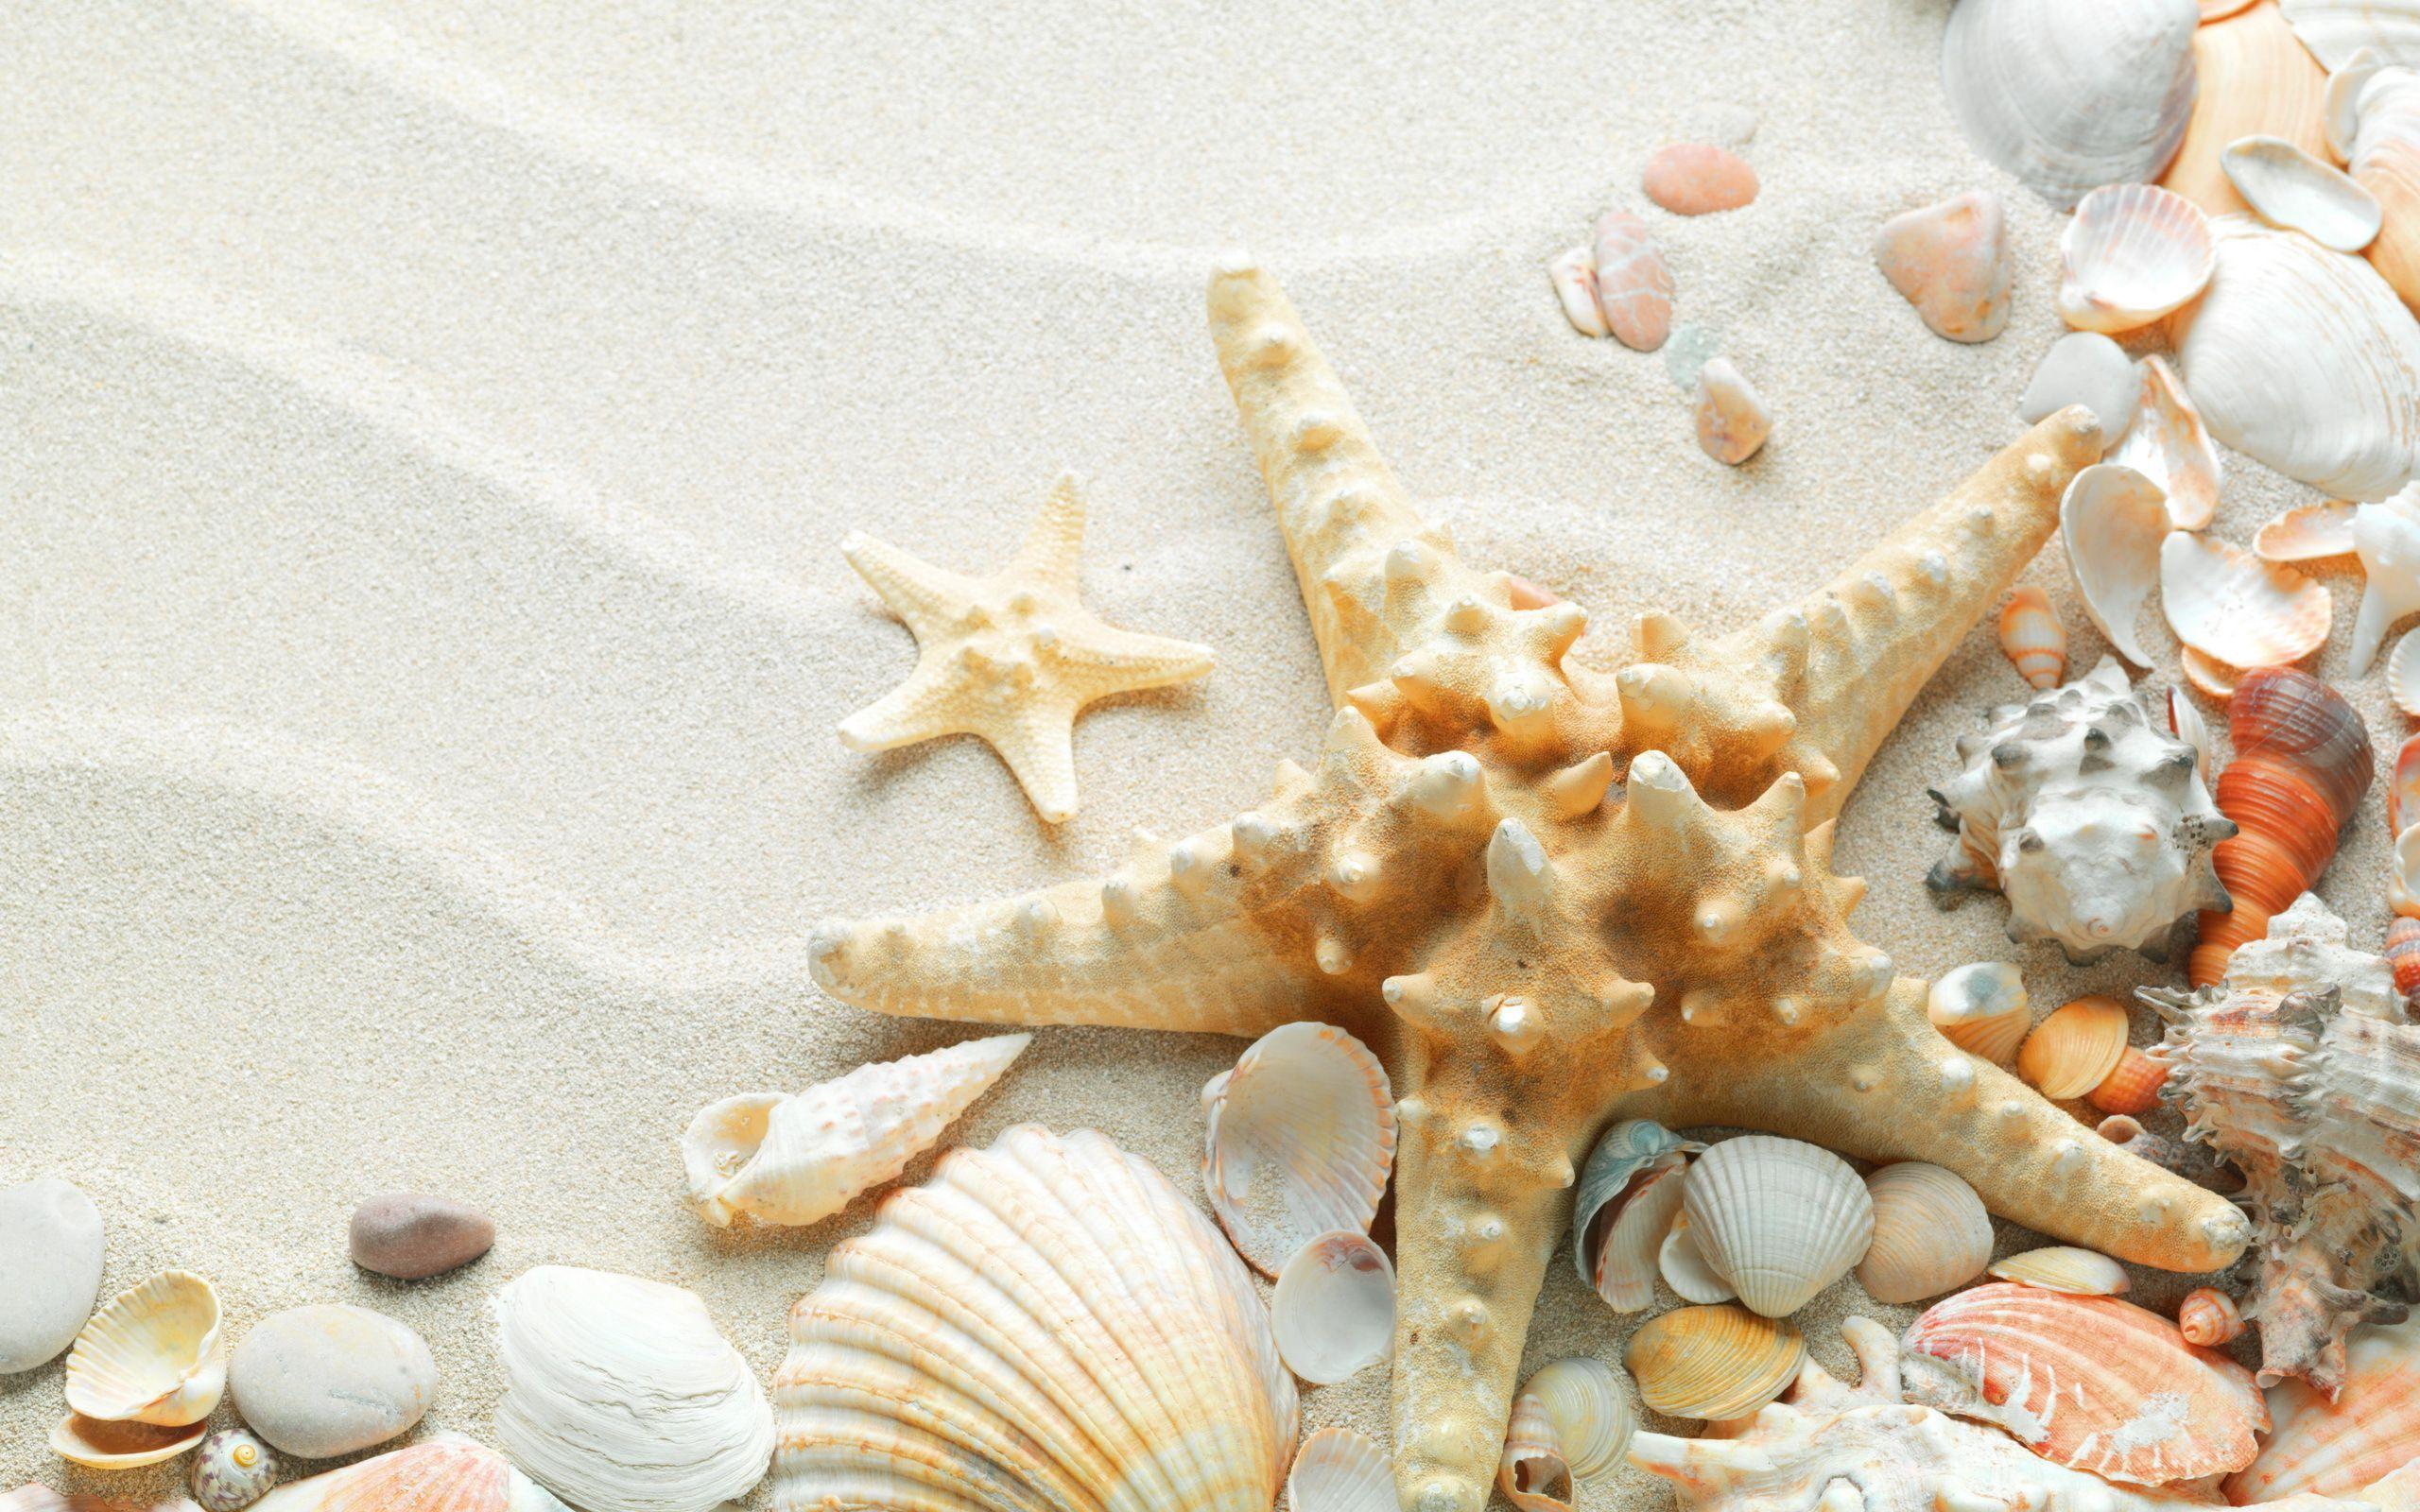 Sea star and shells on white sand